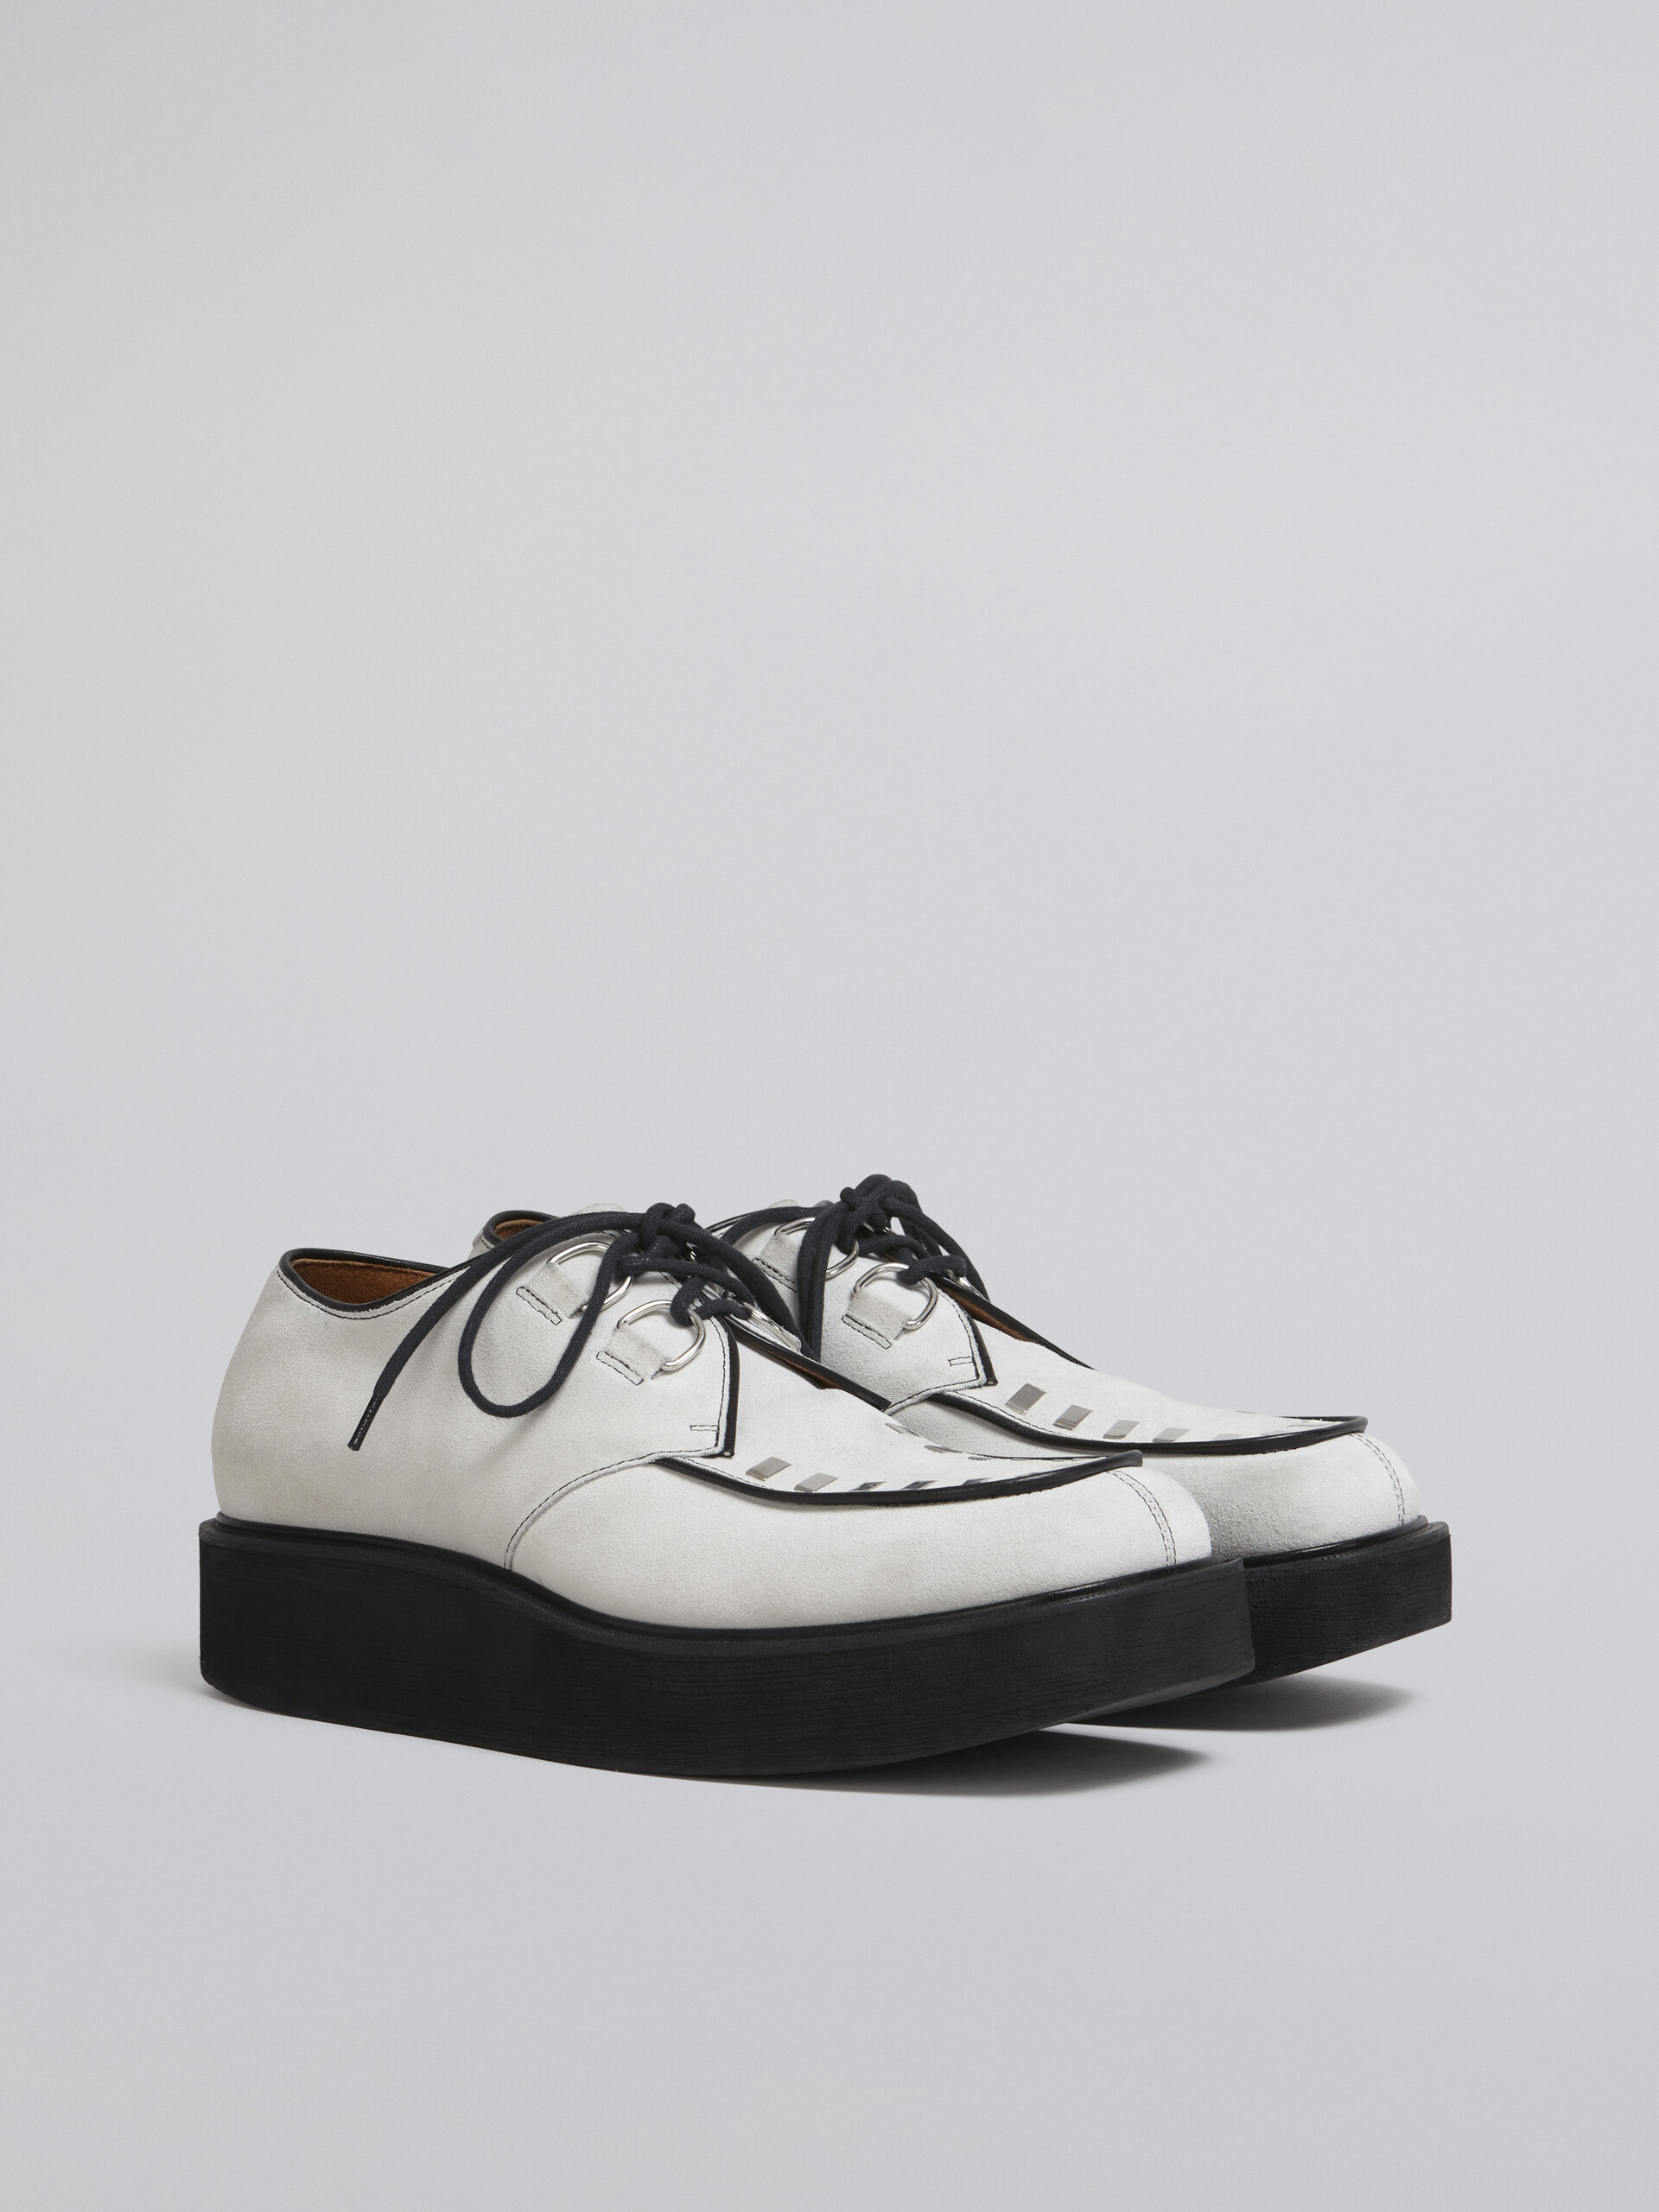 Calfskin lace-up with square toe - Lace-ups - Image 2